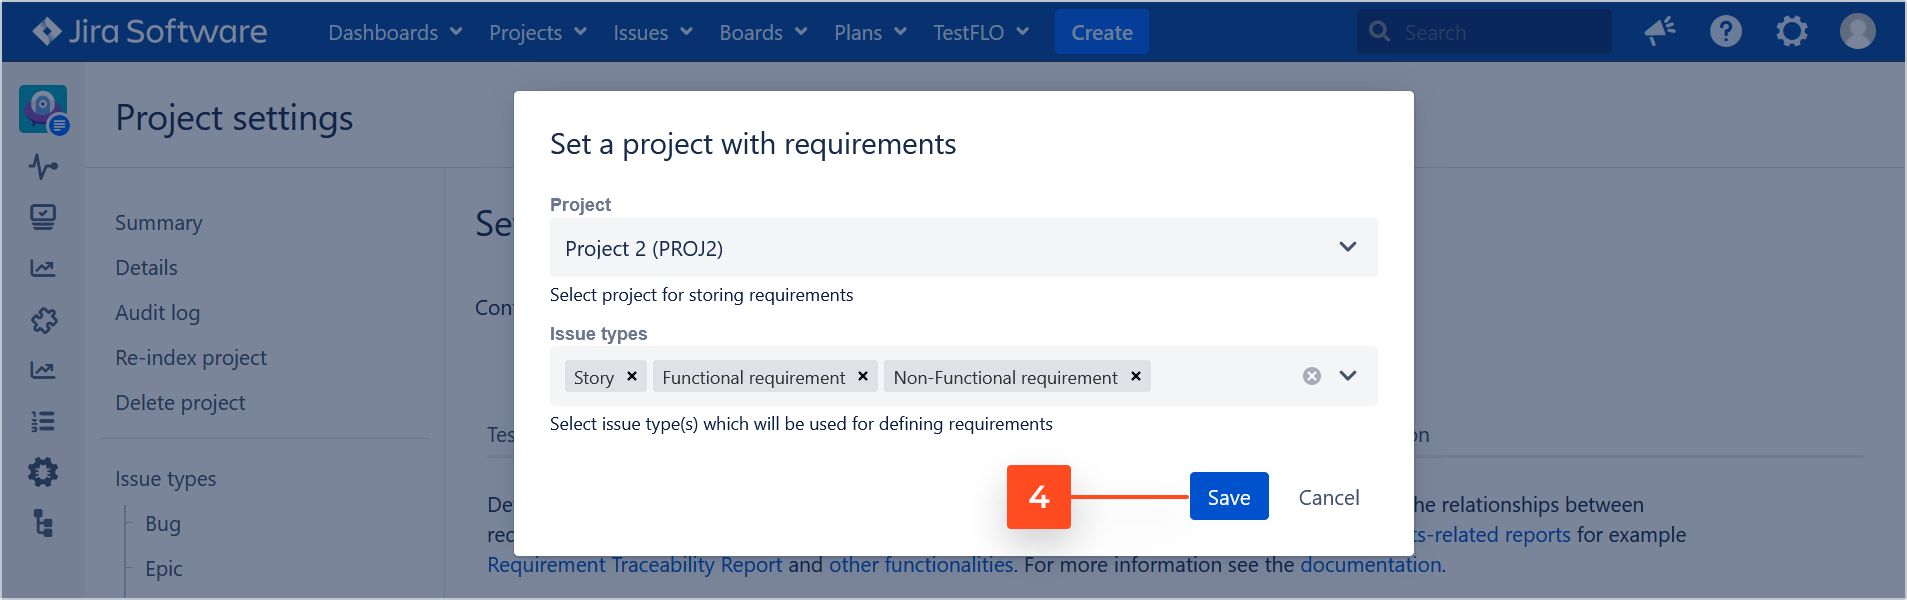 Adding Requirements to project